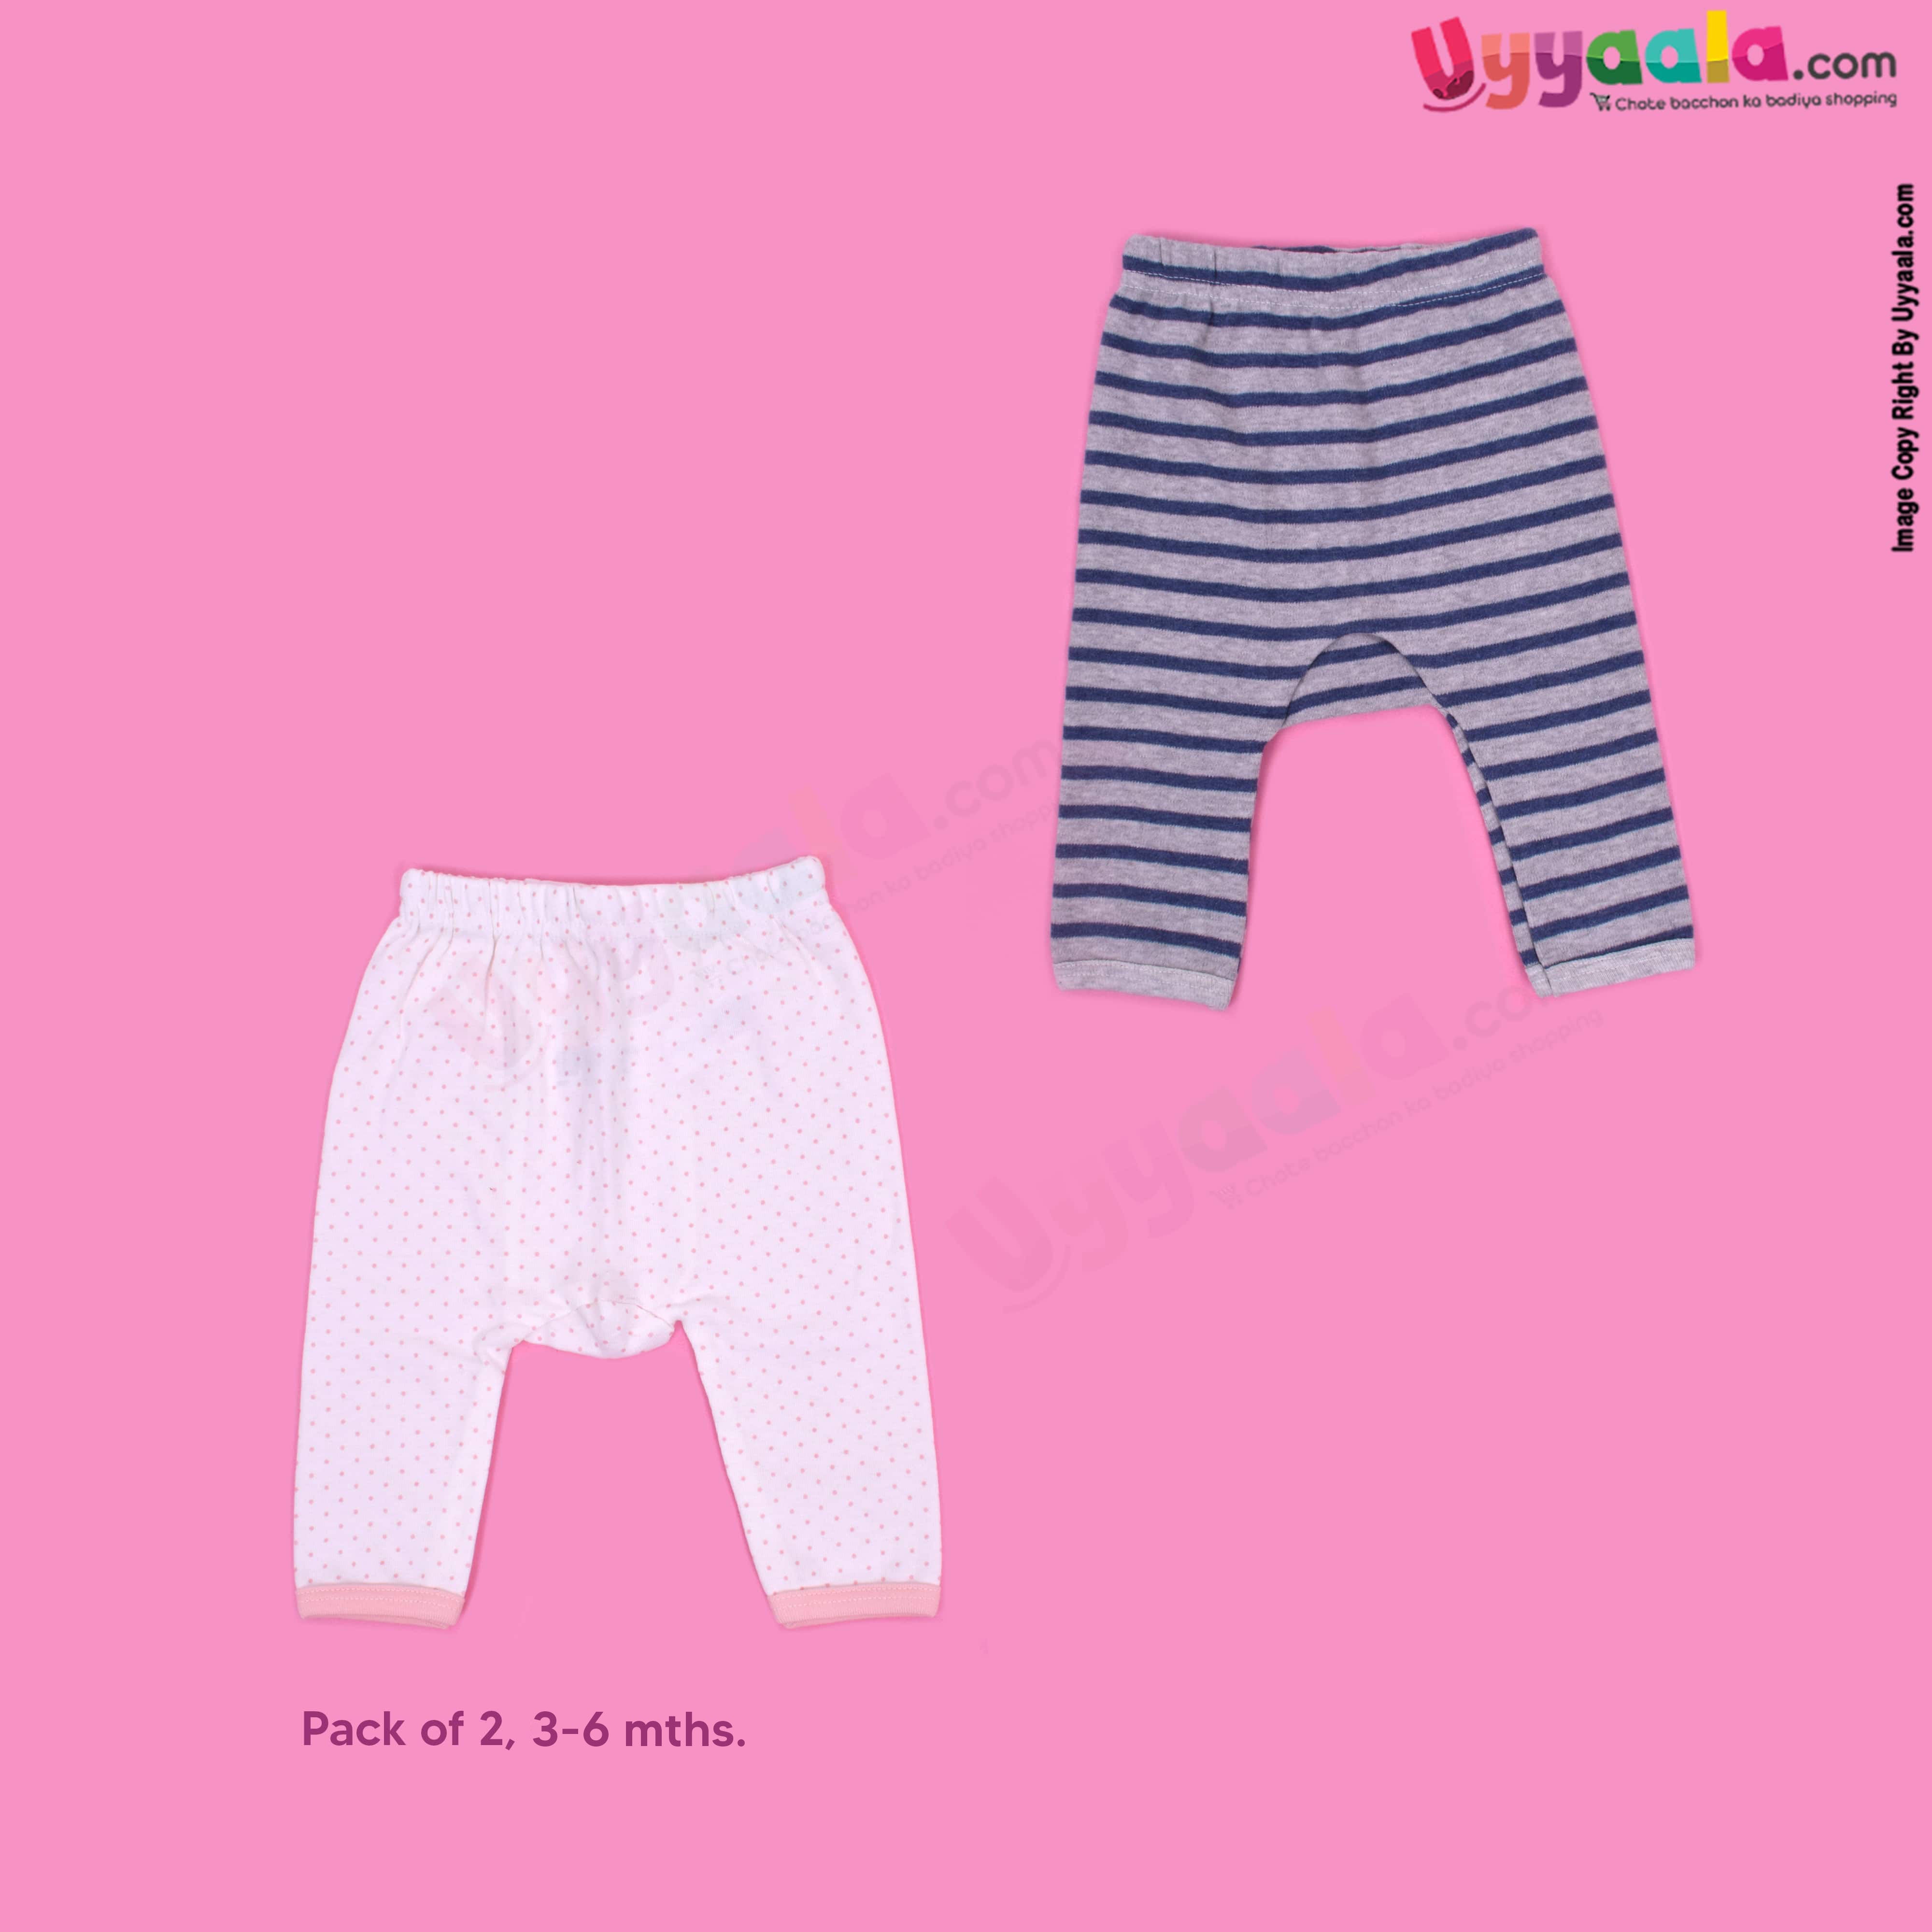 PRECIOUS ONE diaper pants 100% soft hosiery cotton pack of 2 - white with pink dots & gray with blue stripes prints(3-6m)